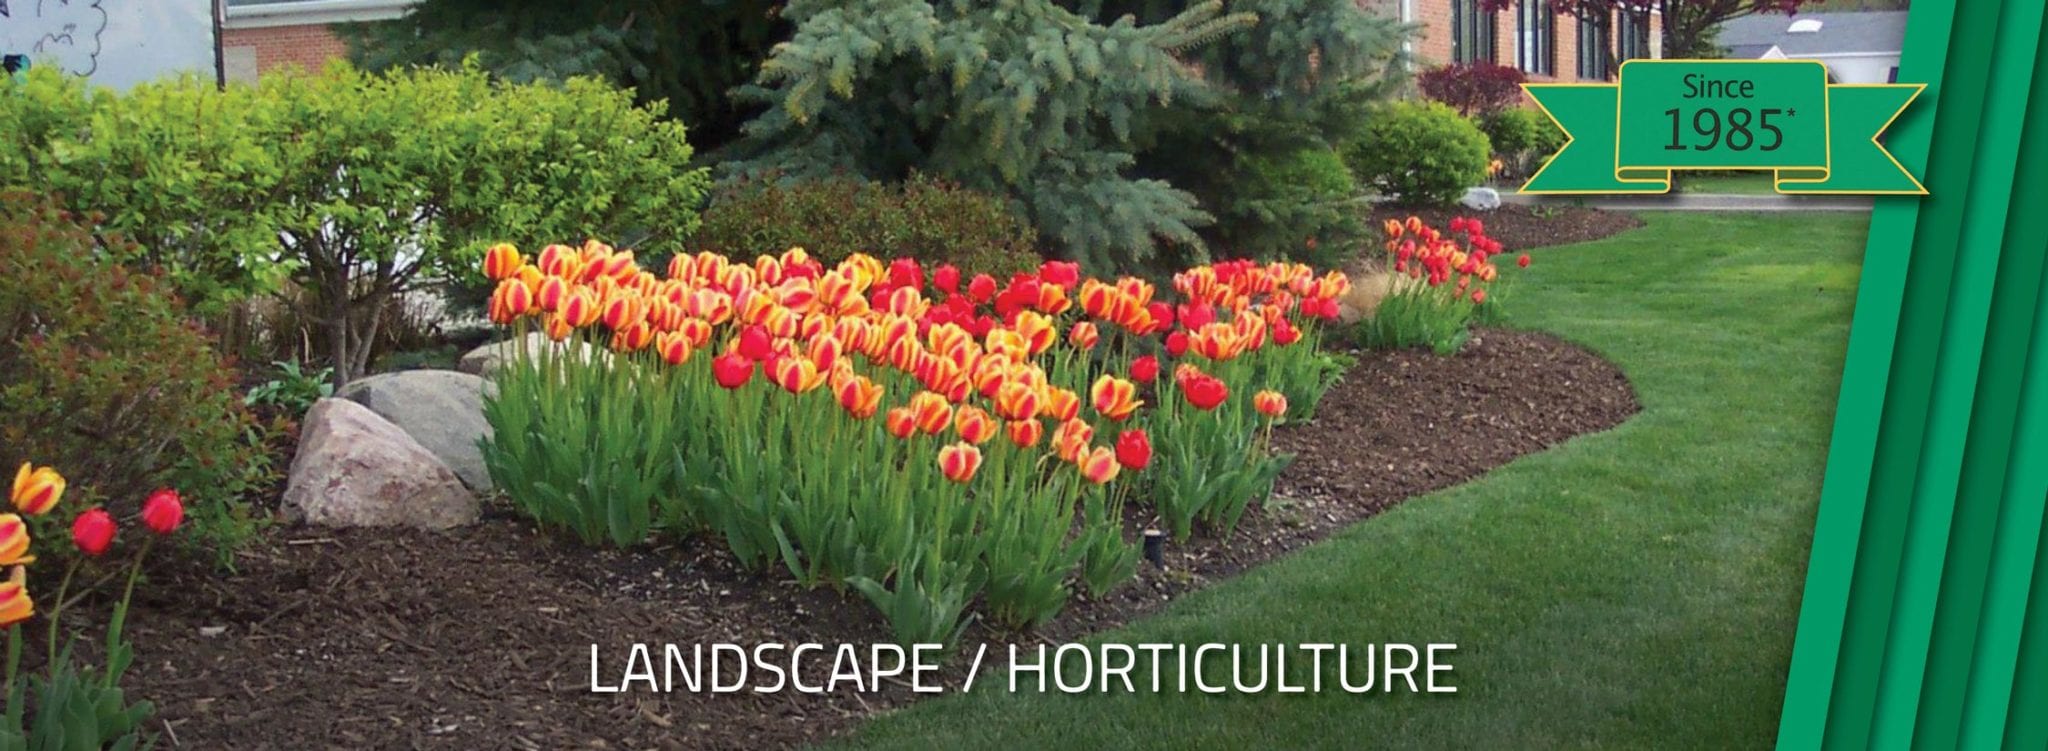 Curbco-Commercial-Industrial-Municipal-Landscape_Horticulture